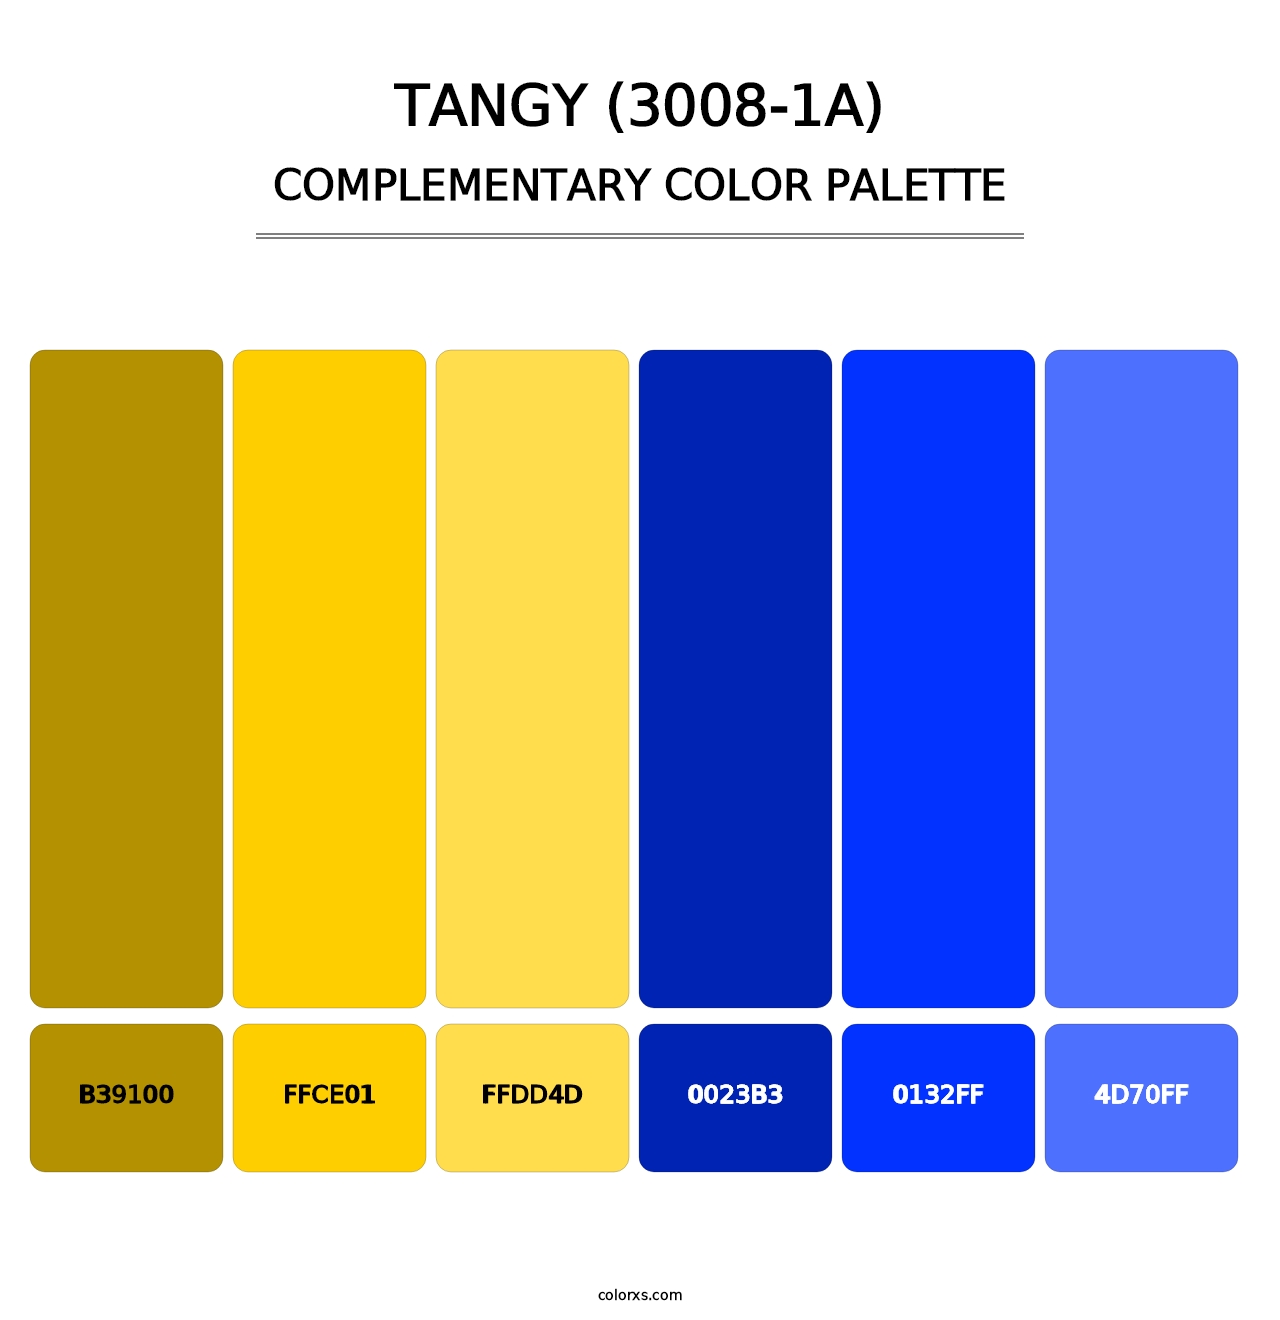 Tangy (3008-1A) - Complementary Color Palette